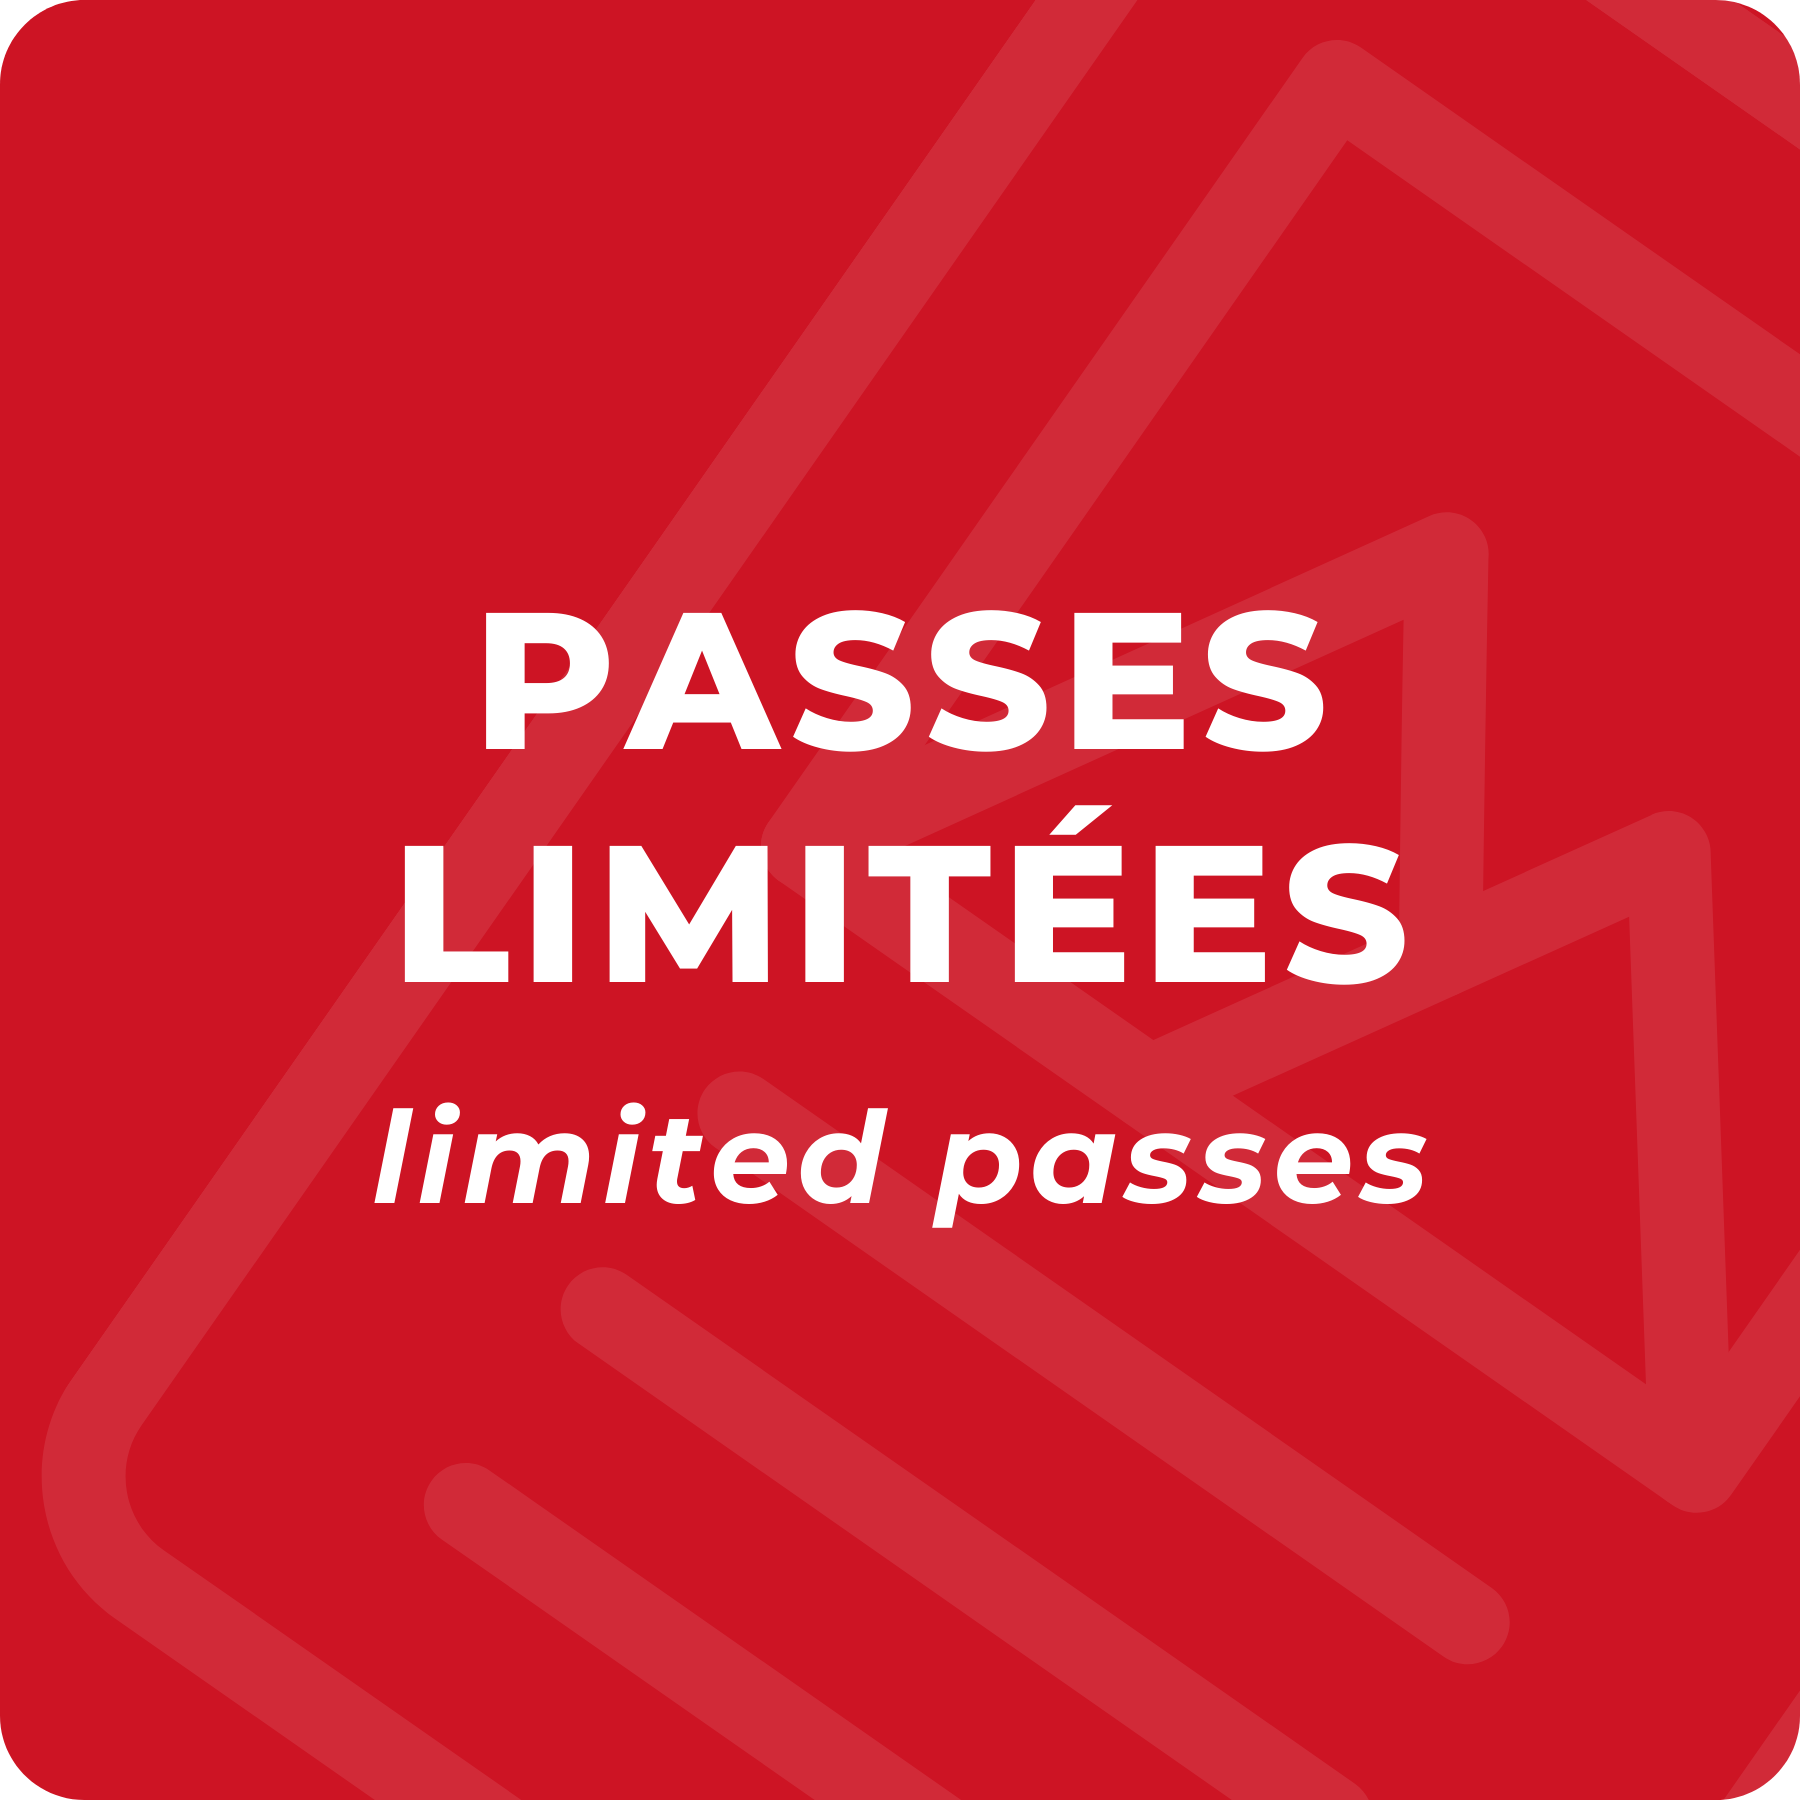 LIMITED PASSES